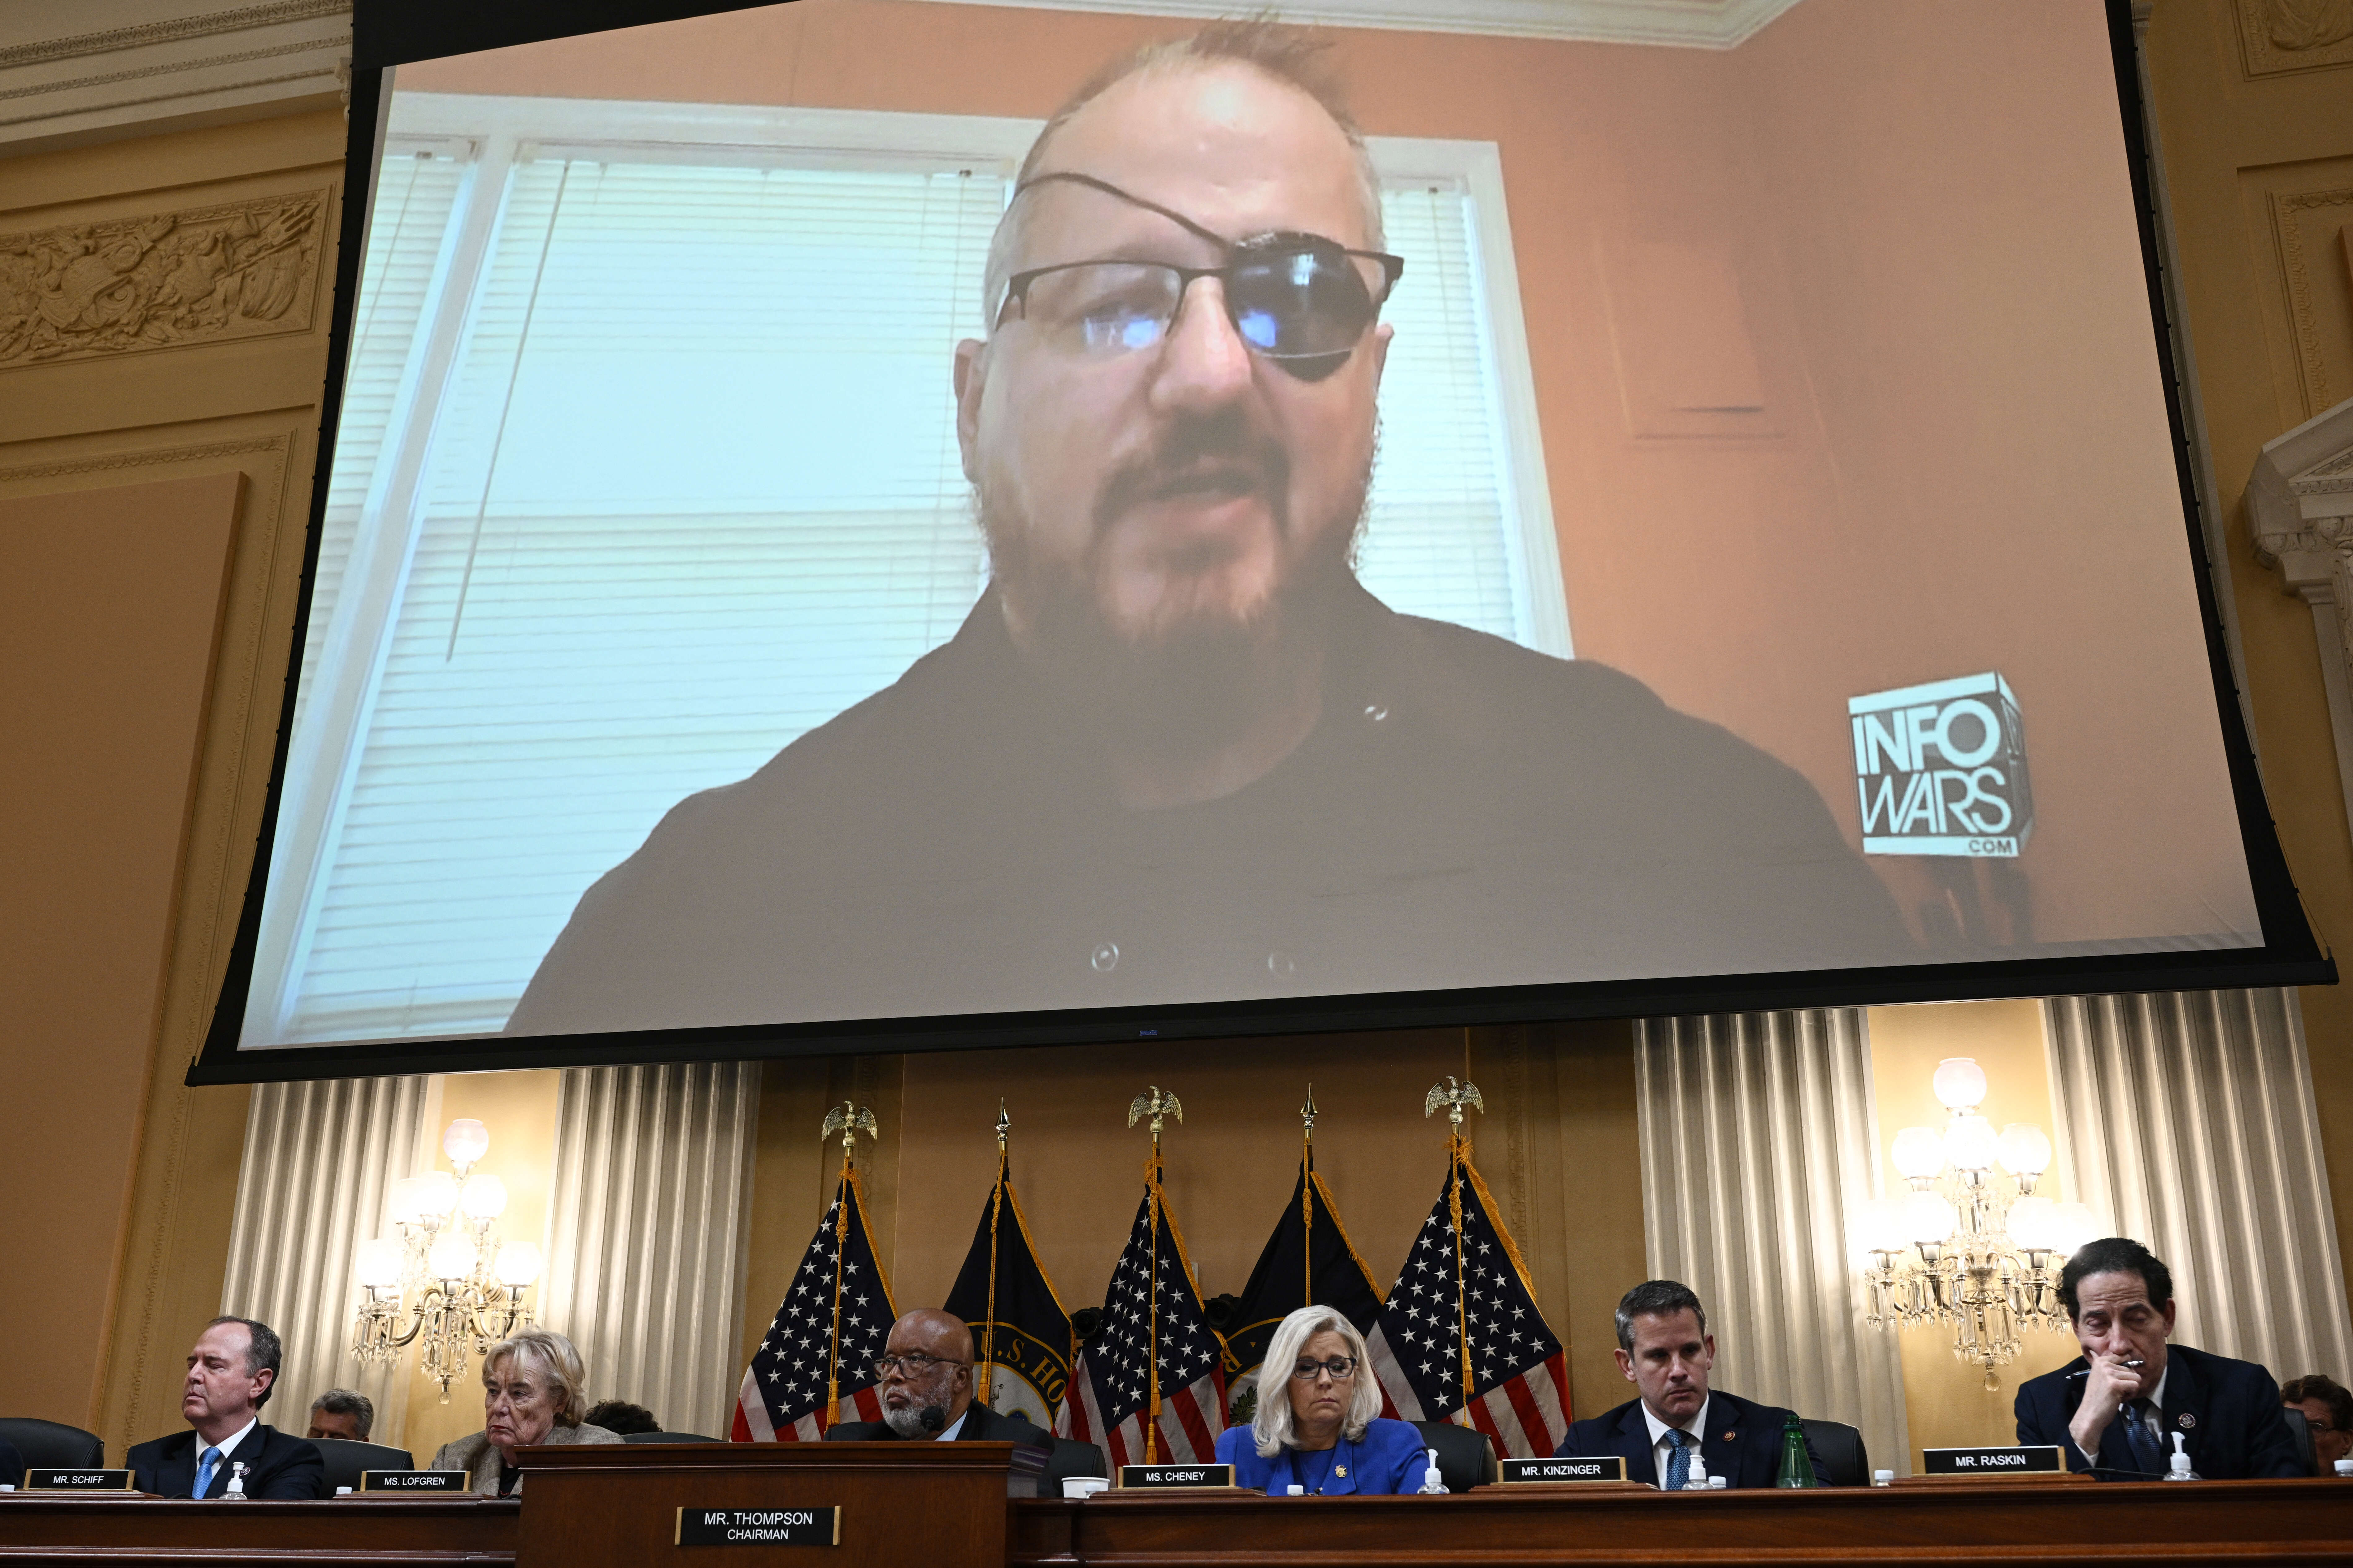 (FILES) In this file photo taken on June 9, 2022 Stewart Rhodes, founder of the Oath Keepers, is seen on a screen during a House Select Committee hearing to Investigate the January 6th Attack on the US Capitol, in the Cannon House Office Building on Capitol Hill in Washington, DC. - Stewart Rhodes, founder of the far-right Oath Keepers militia, was found guilty of sedition on November 29, 2022 for his role in the January 6, 2021 attack on the US Capitol by supporters of former president Donald Trump. (Photo by Brendan SMIALOWSKI / AFP)